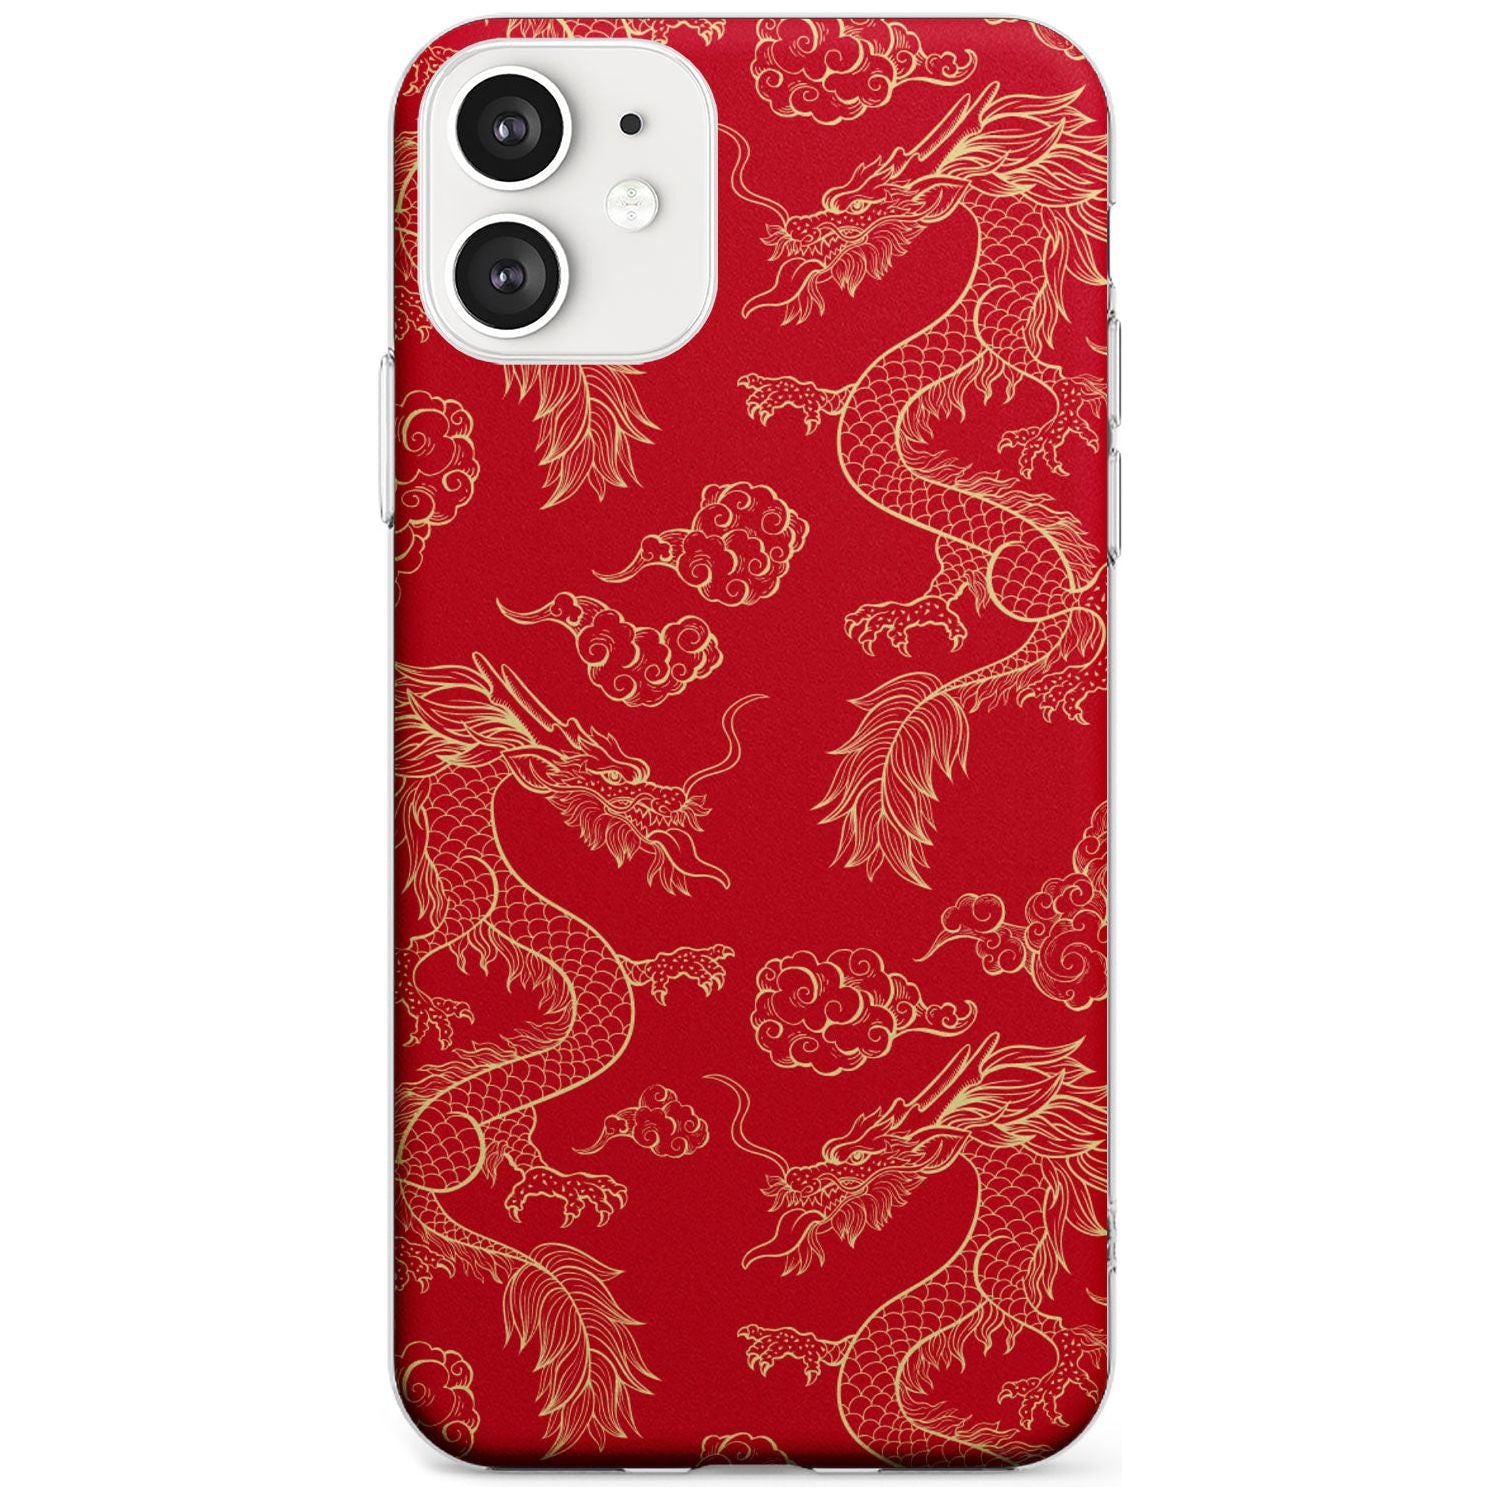 Red and Gold Dragon Pattern Slim TPU Phone Case for iPhone 11